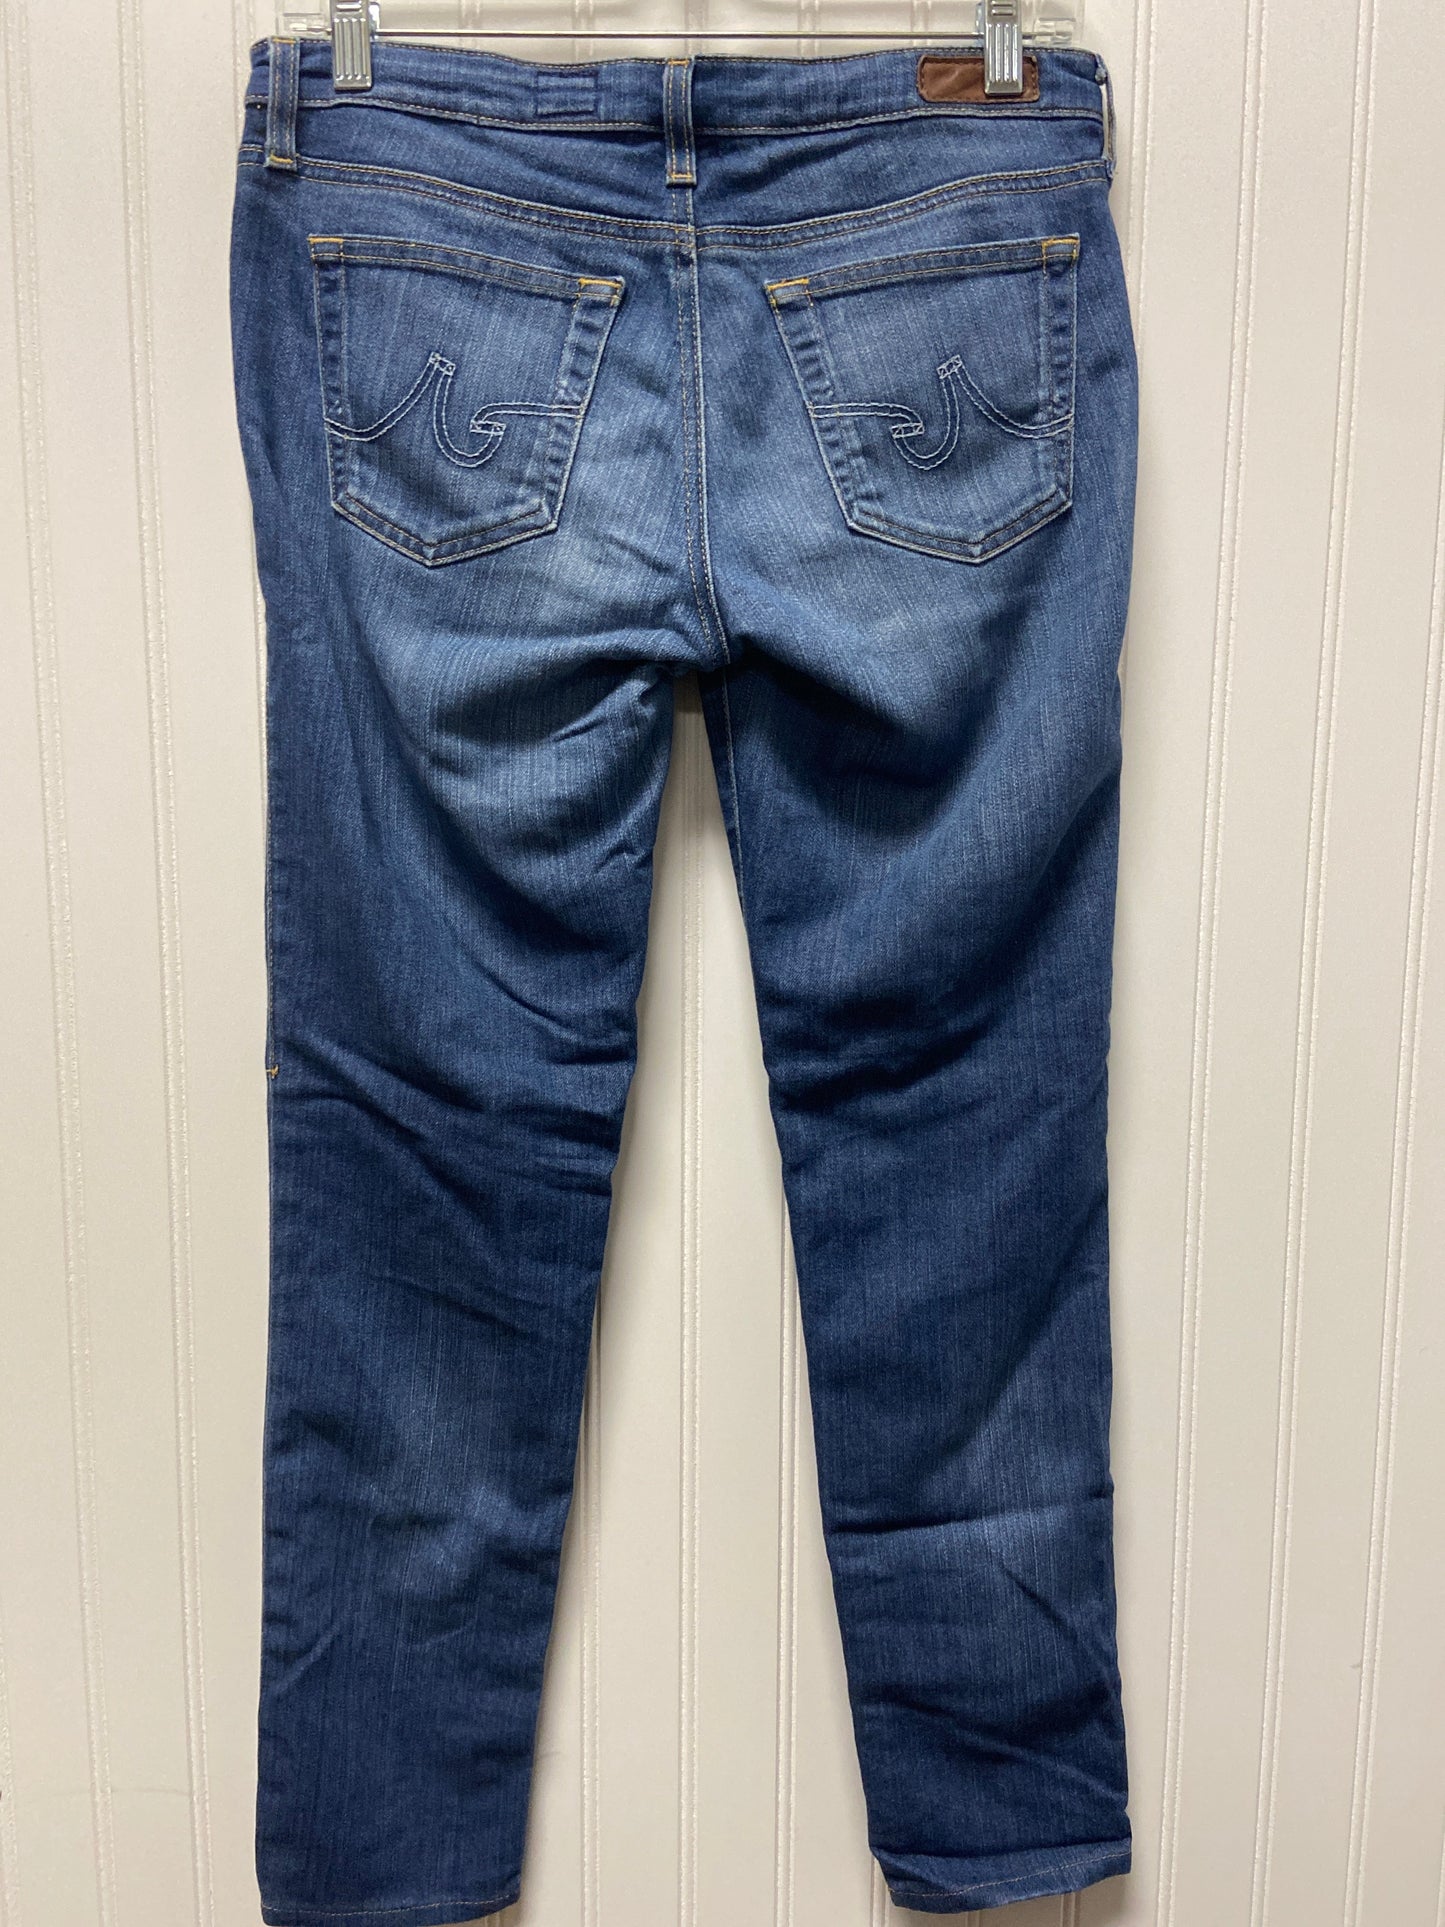 Jeans Designer By Adriano Goldschmied  Size: 6